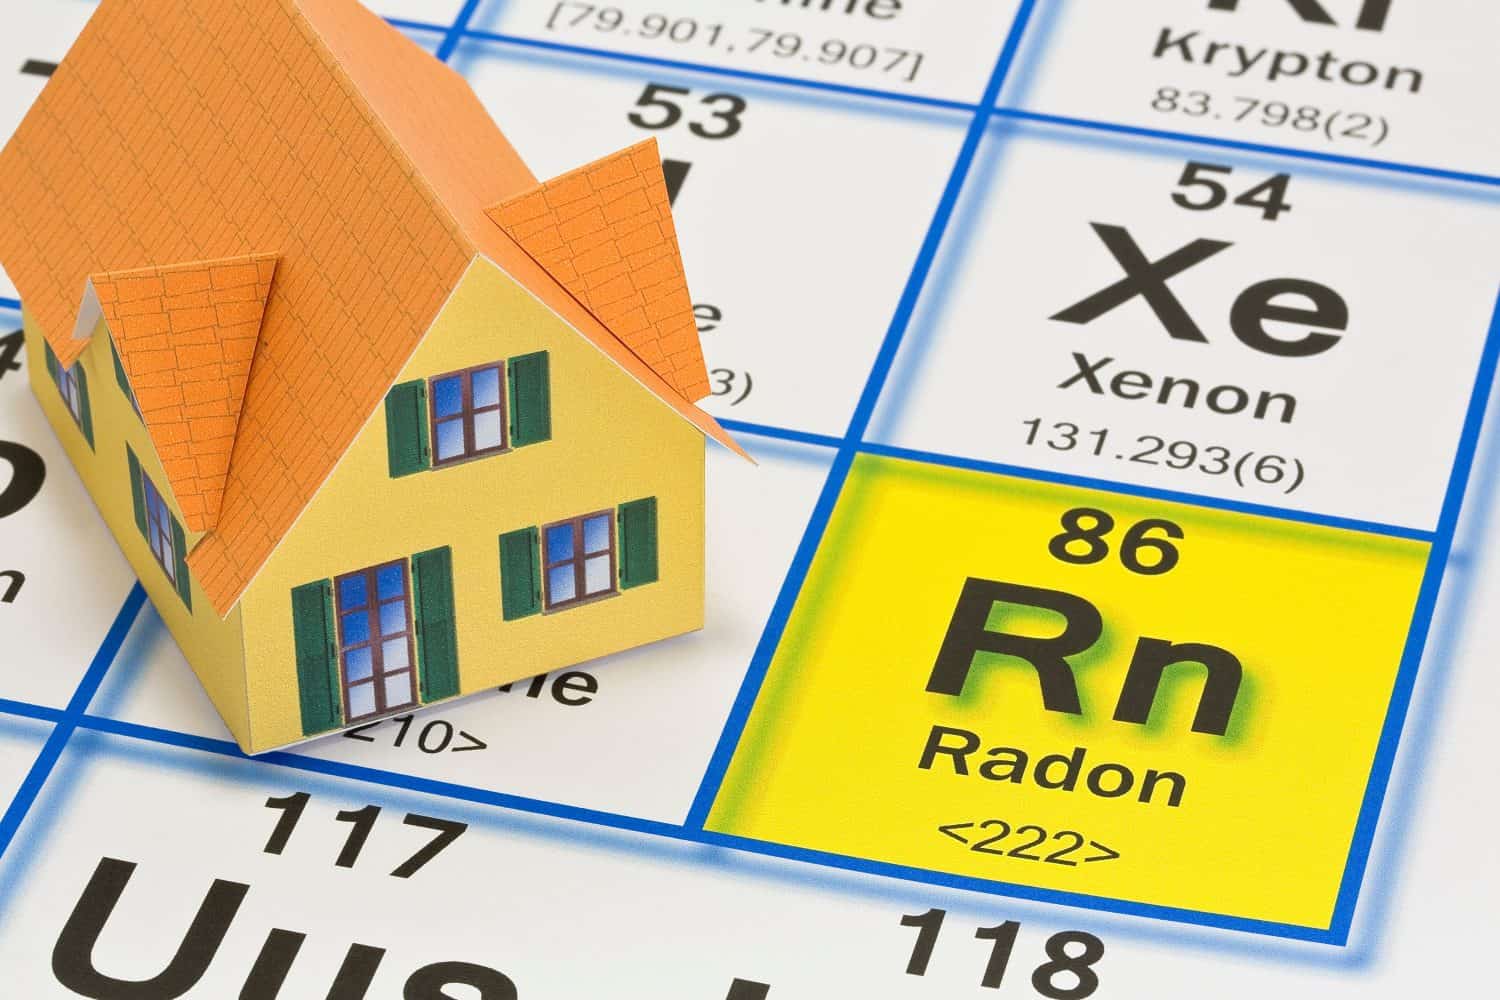 The danger of natural radon gas in our homes - concept with the Mendeleev periodic table of the elements and residential home model